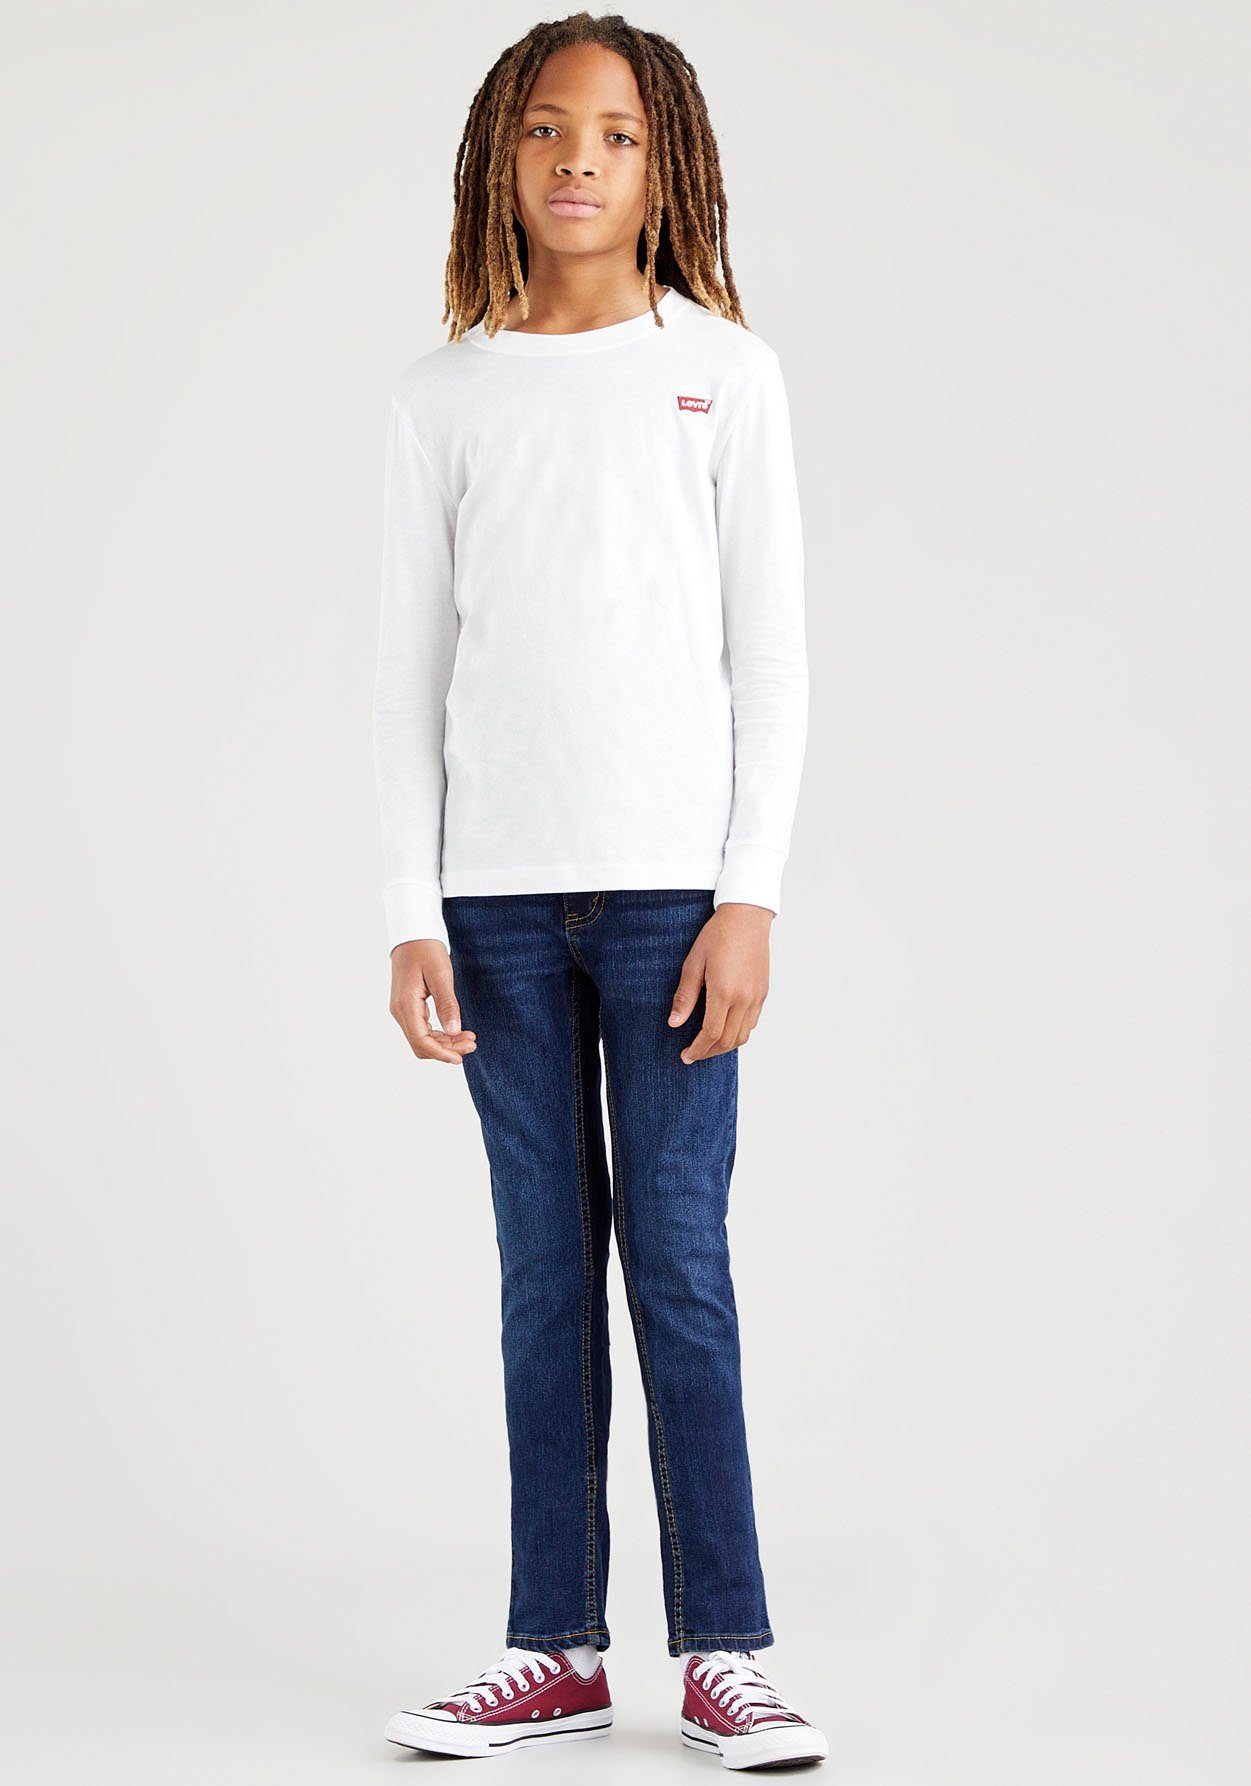 Langarmshirt CHESTHIT Levi's® TEE for BATWING L/S Kids weiß BOYS